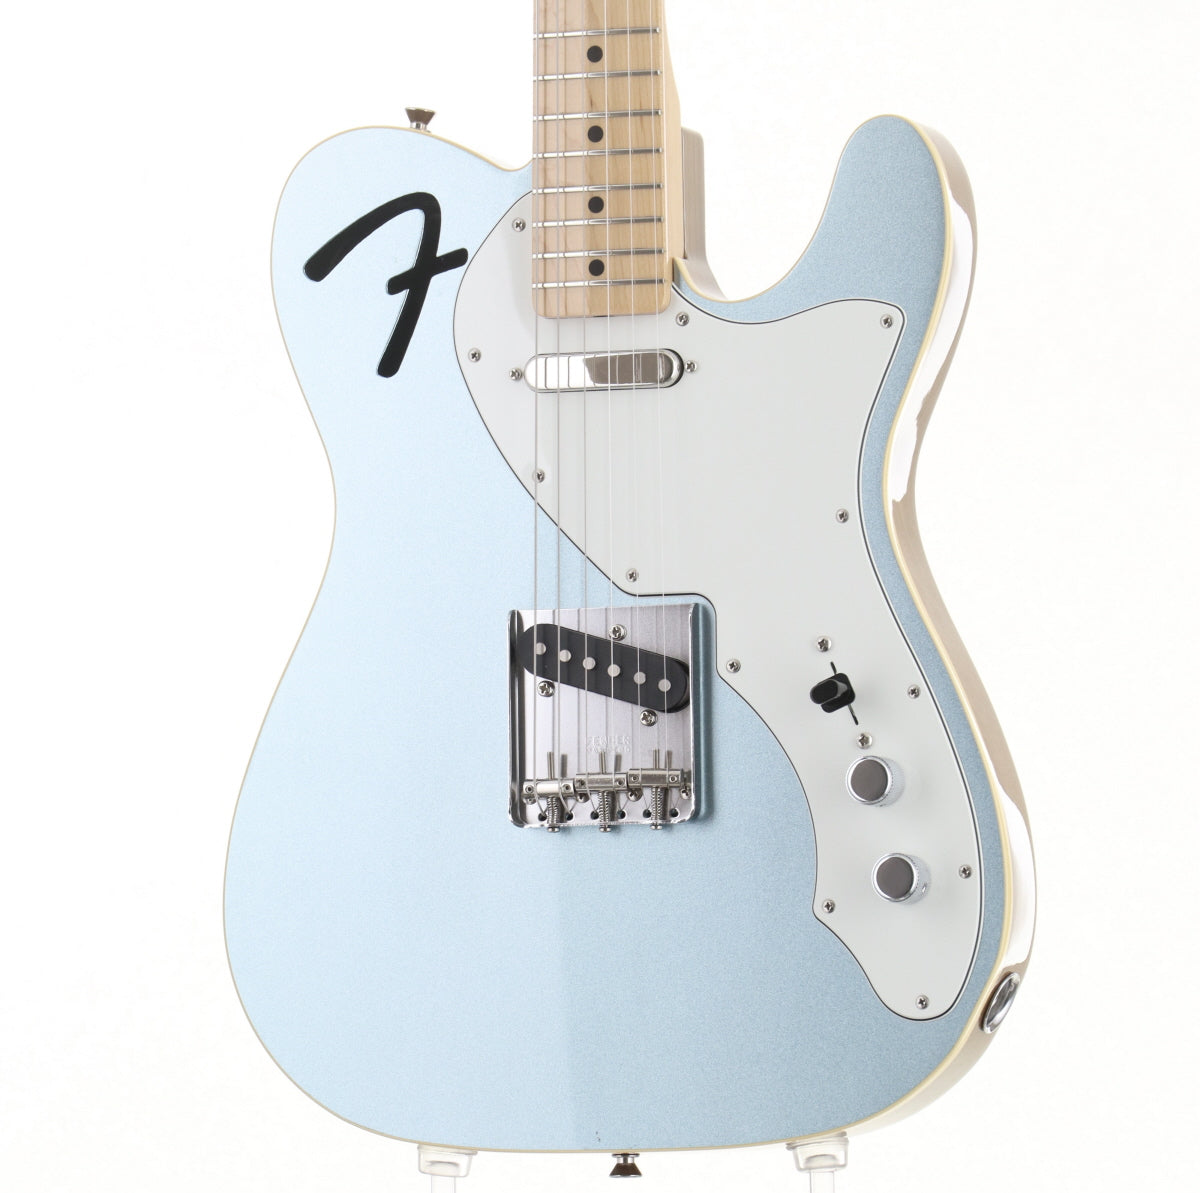 [SN JD21017810] USED Fenfder / MIJ Limited F-Hole Telecaster Thinline Mystic Ice Blue [03]